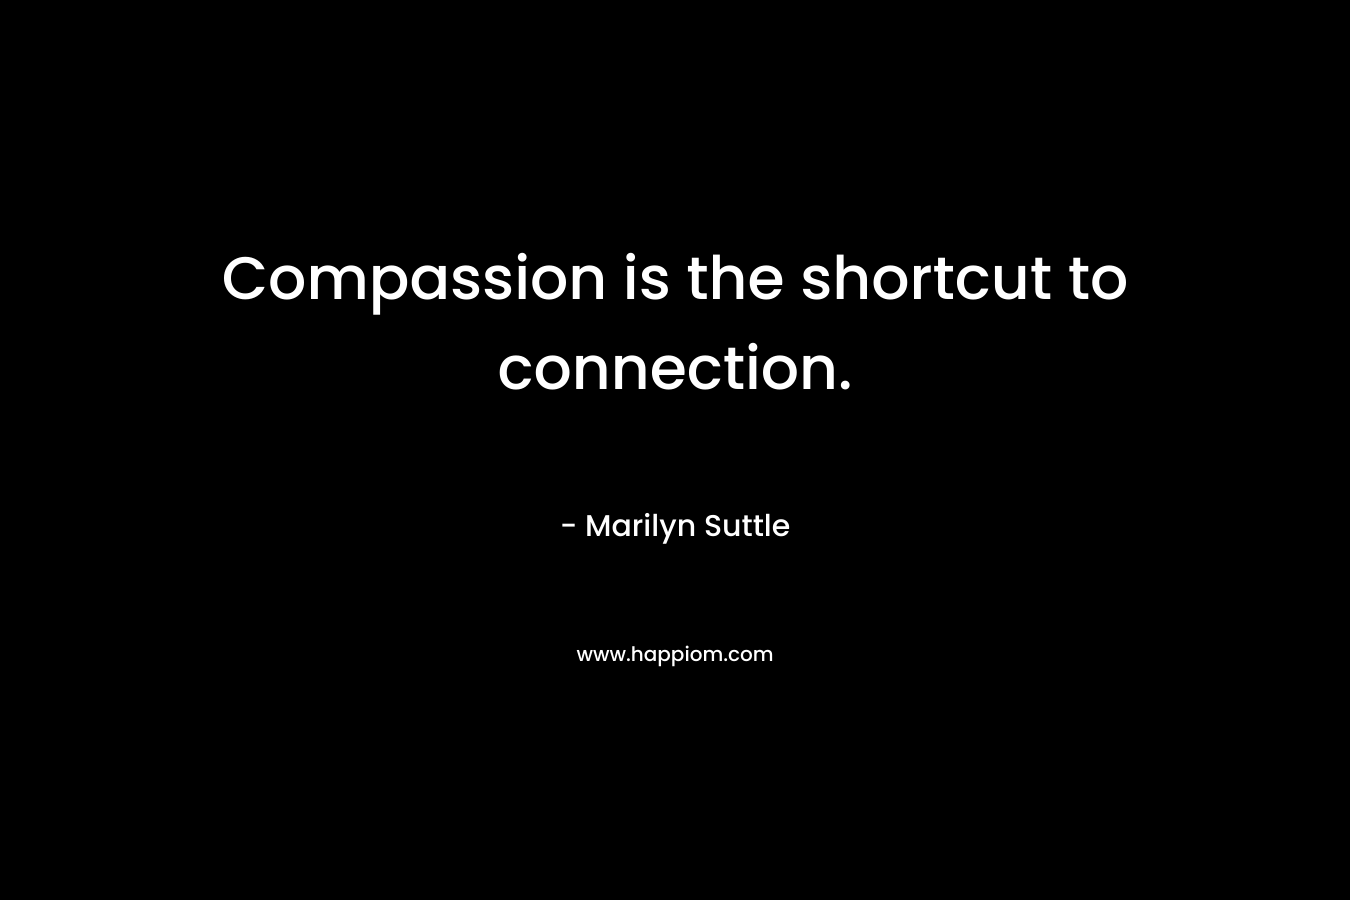 Compassion is the shortcut to connection. – Marilyn Suttle